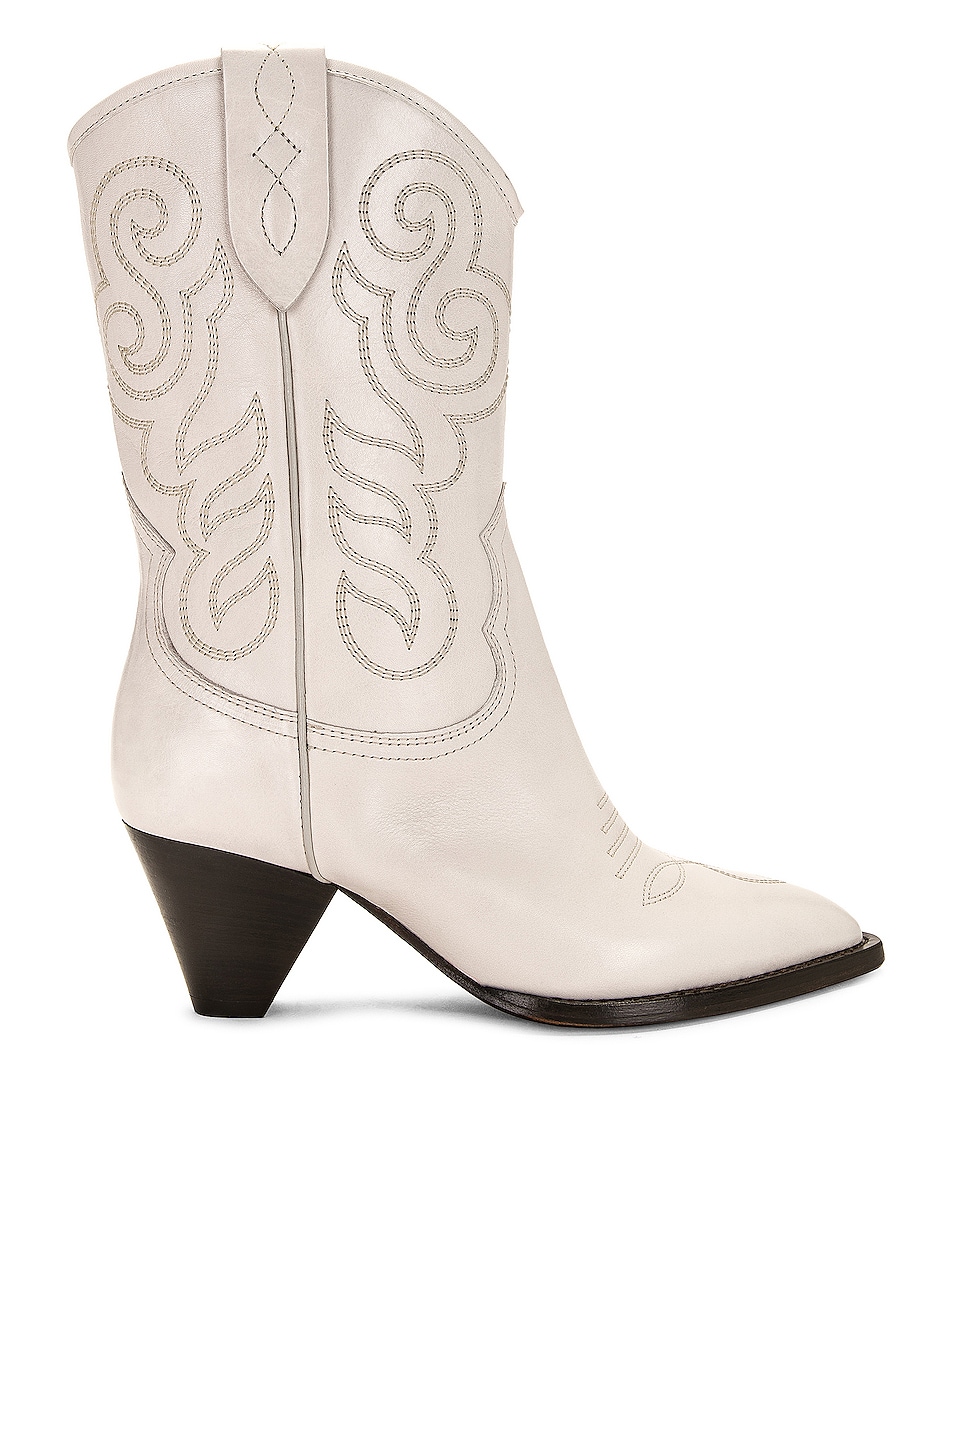 Image 1 of Isabel Marant Luliette Embroidered Boot in Chalk